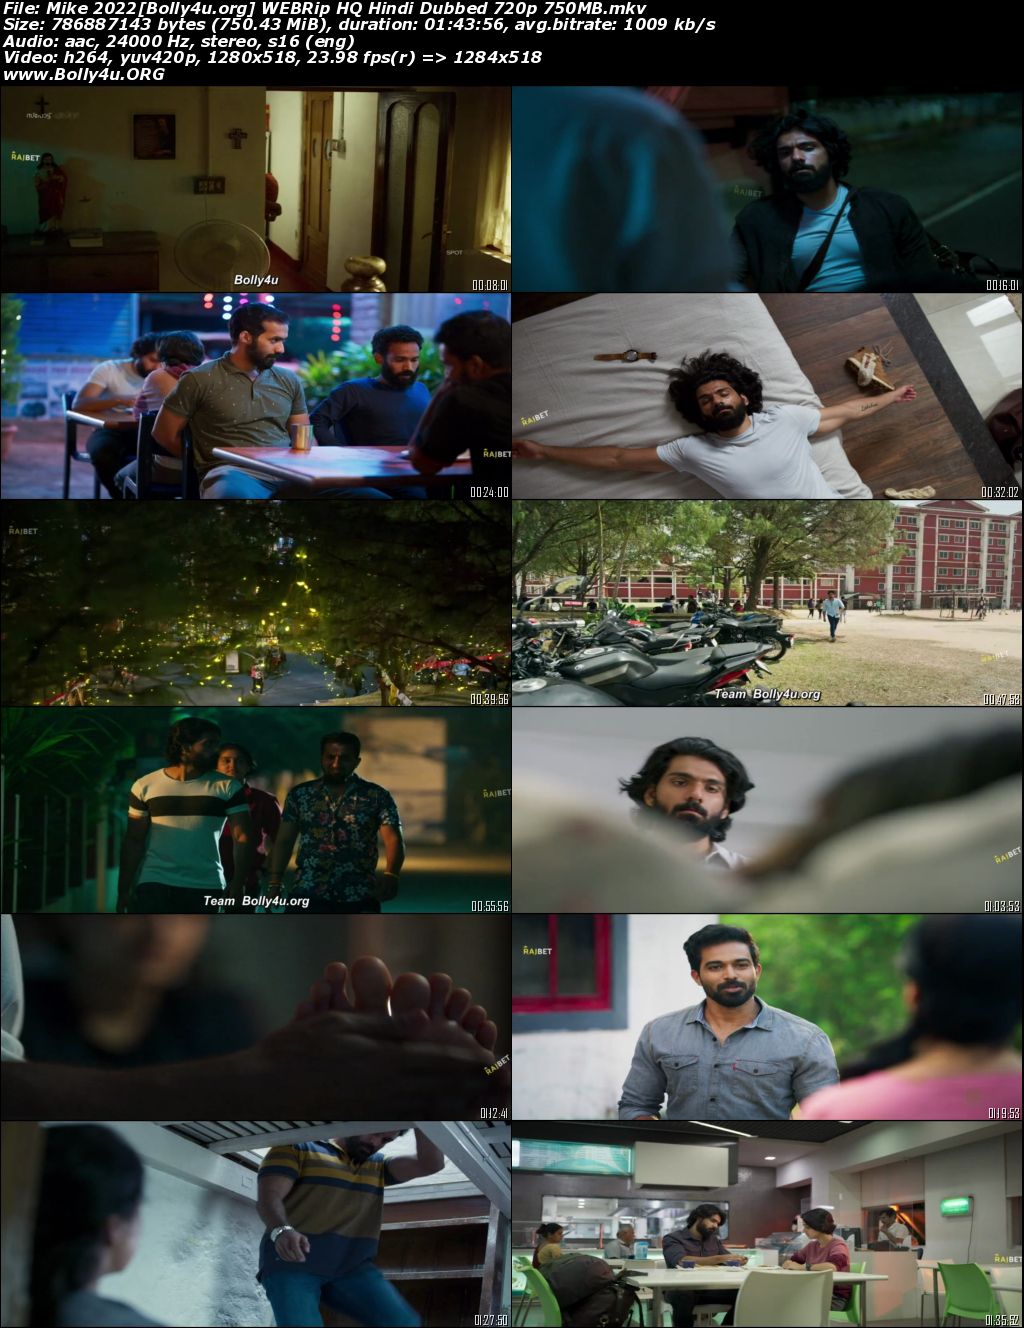 Mike 2022 WEBRip Hindi HQ Dubbed Full Movie Download 1080p 720p 480p